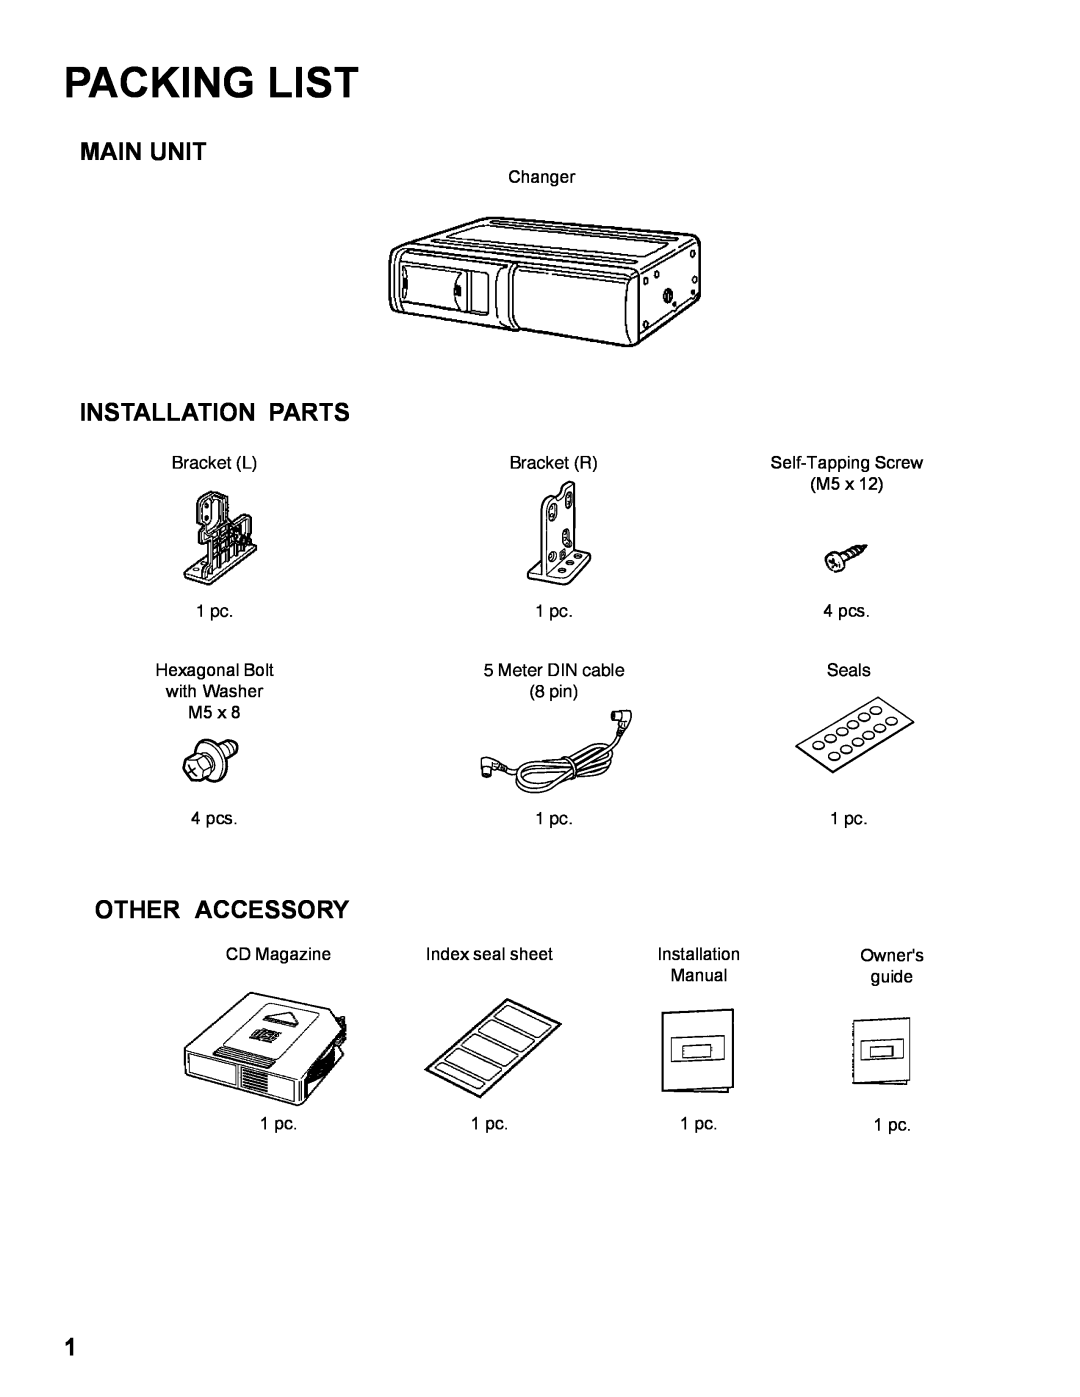 Audiovox SP-6CD installation manual Packing List, Main Unit, Installation Parts, Other Accessory 